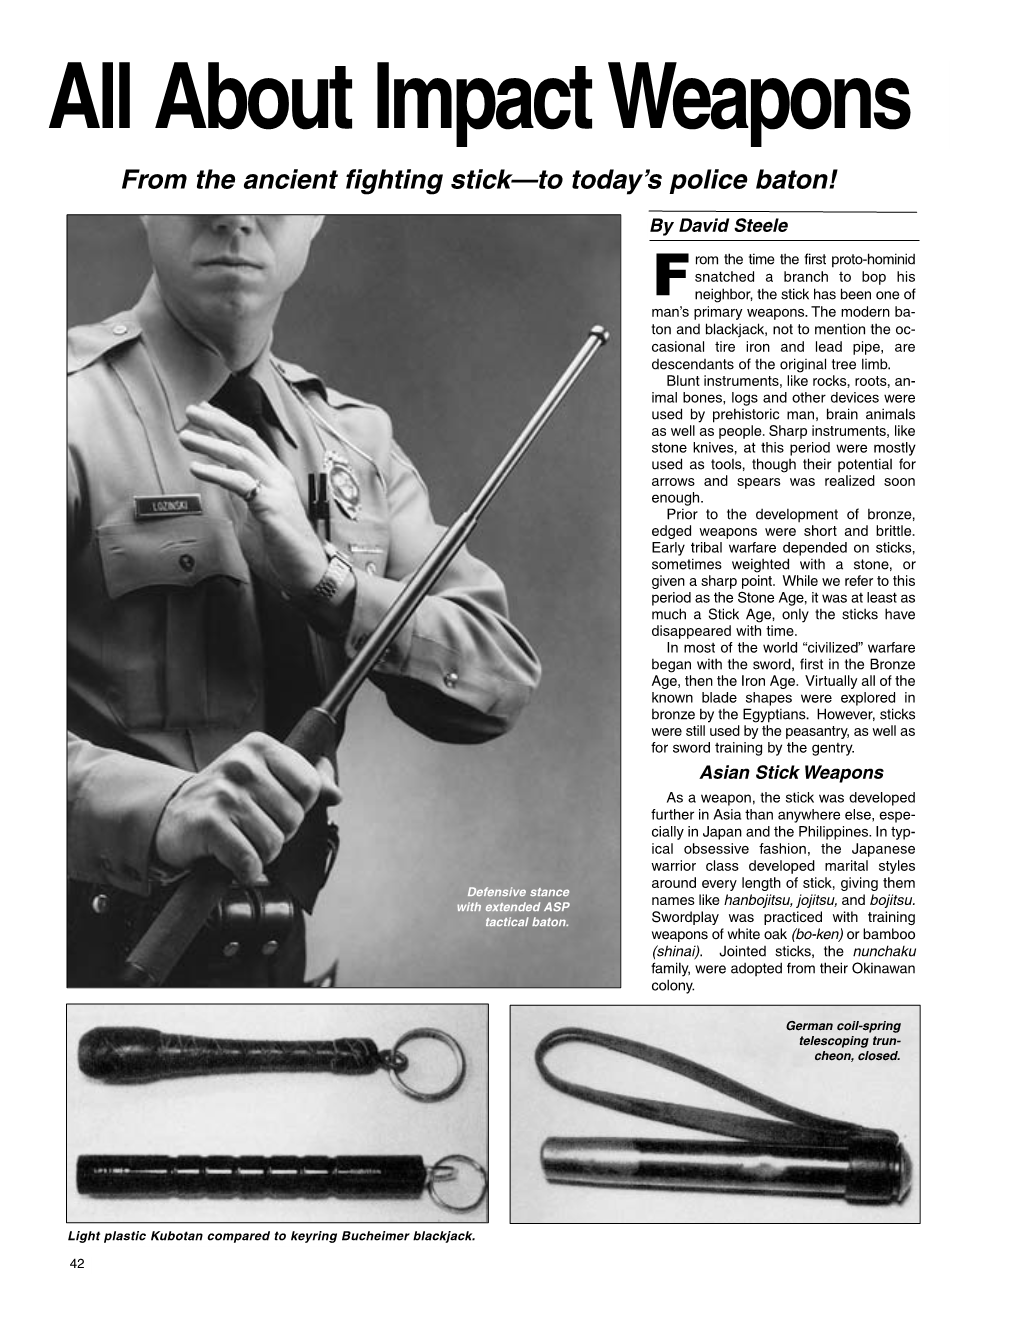 All About Impact Weapons from the Ancient Fighting Stick—To Today’S Police Baton!